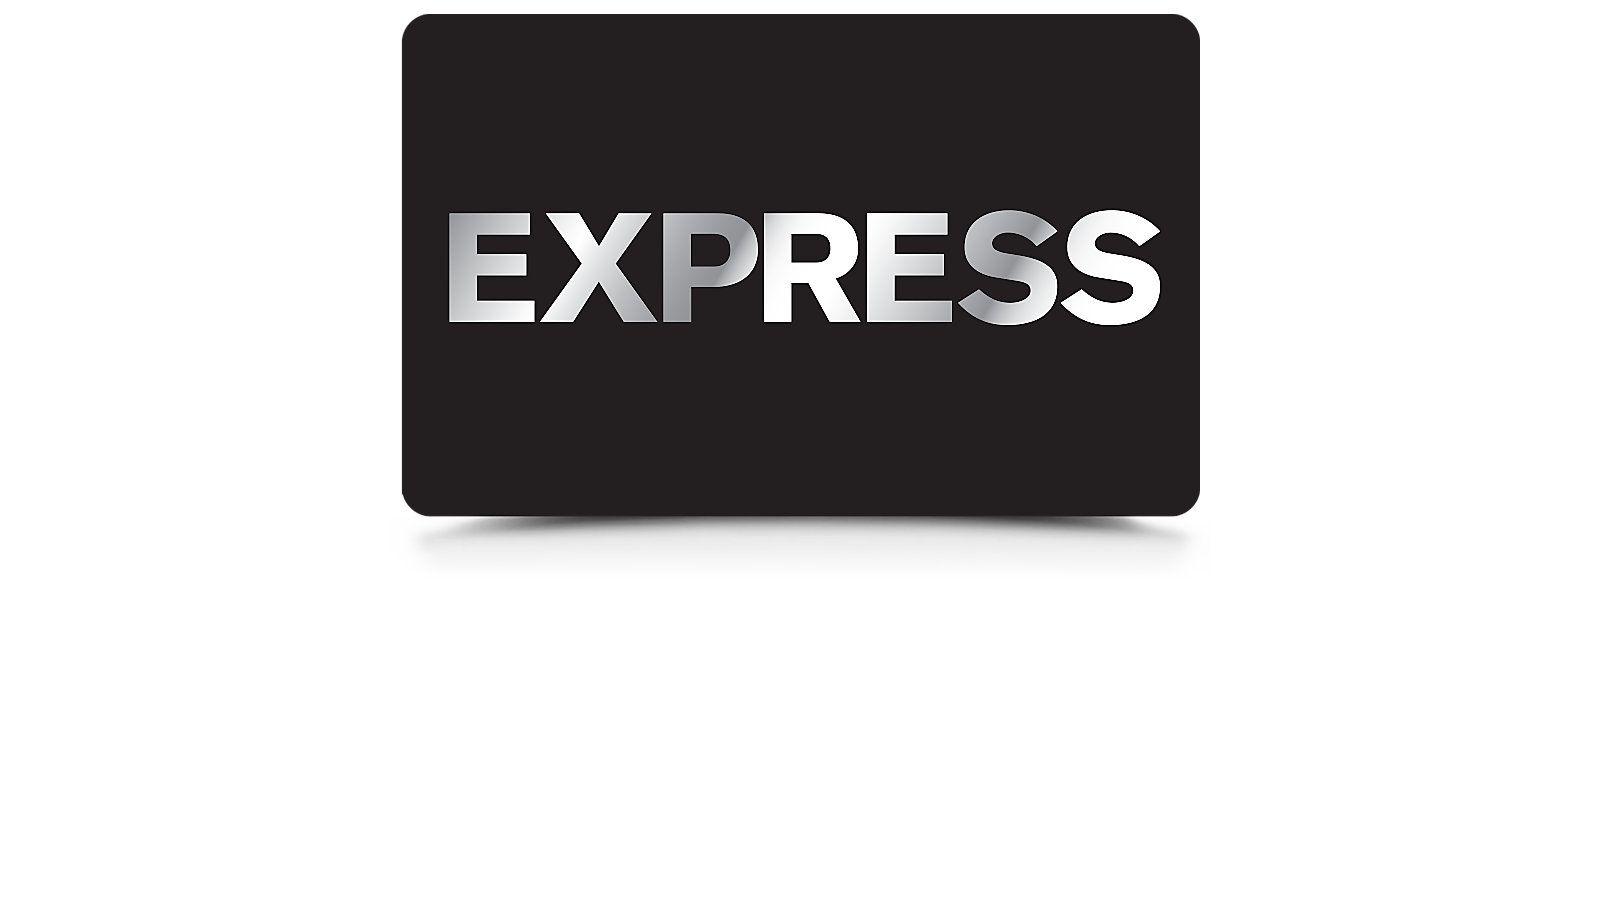 Express Clothing Store Logo - image for express clothing store logo 7code150.tk